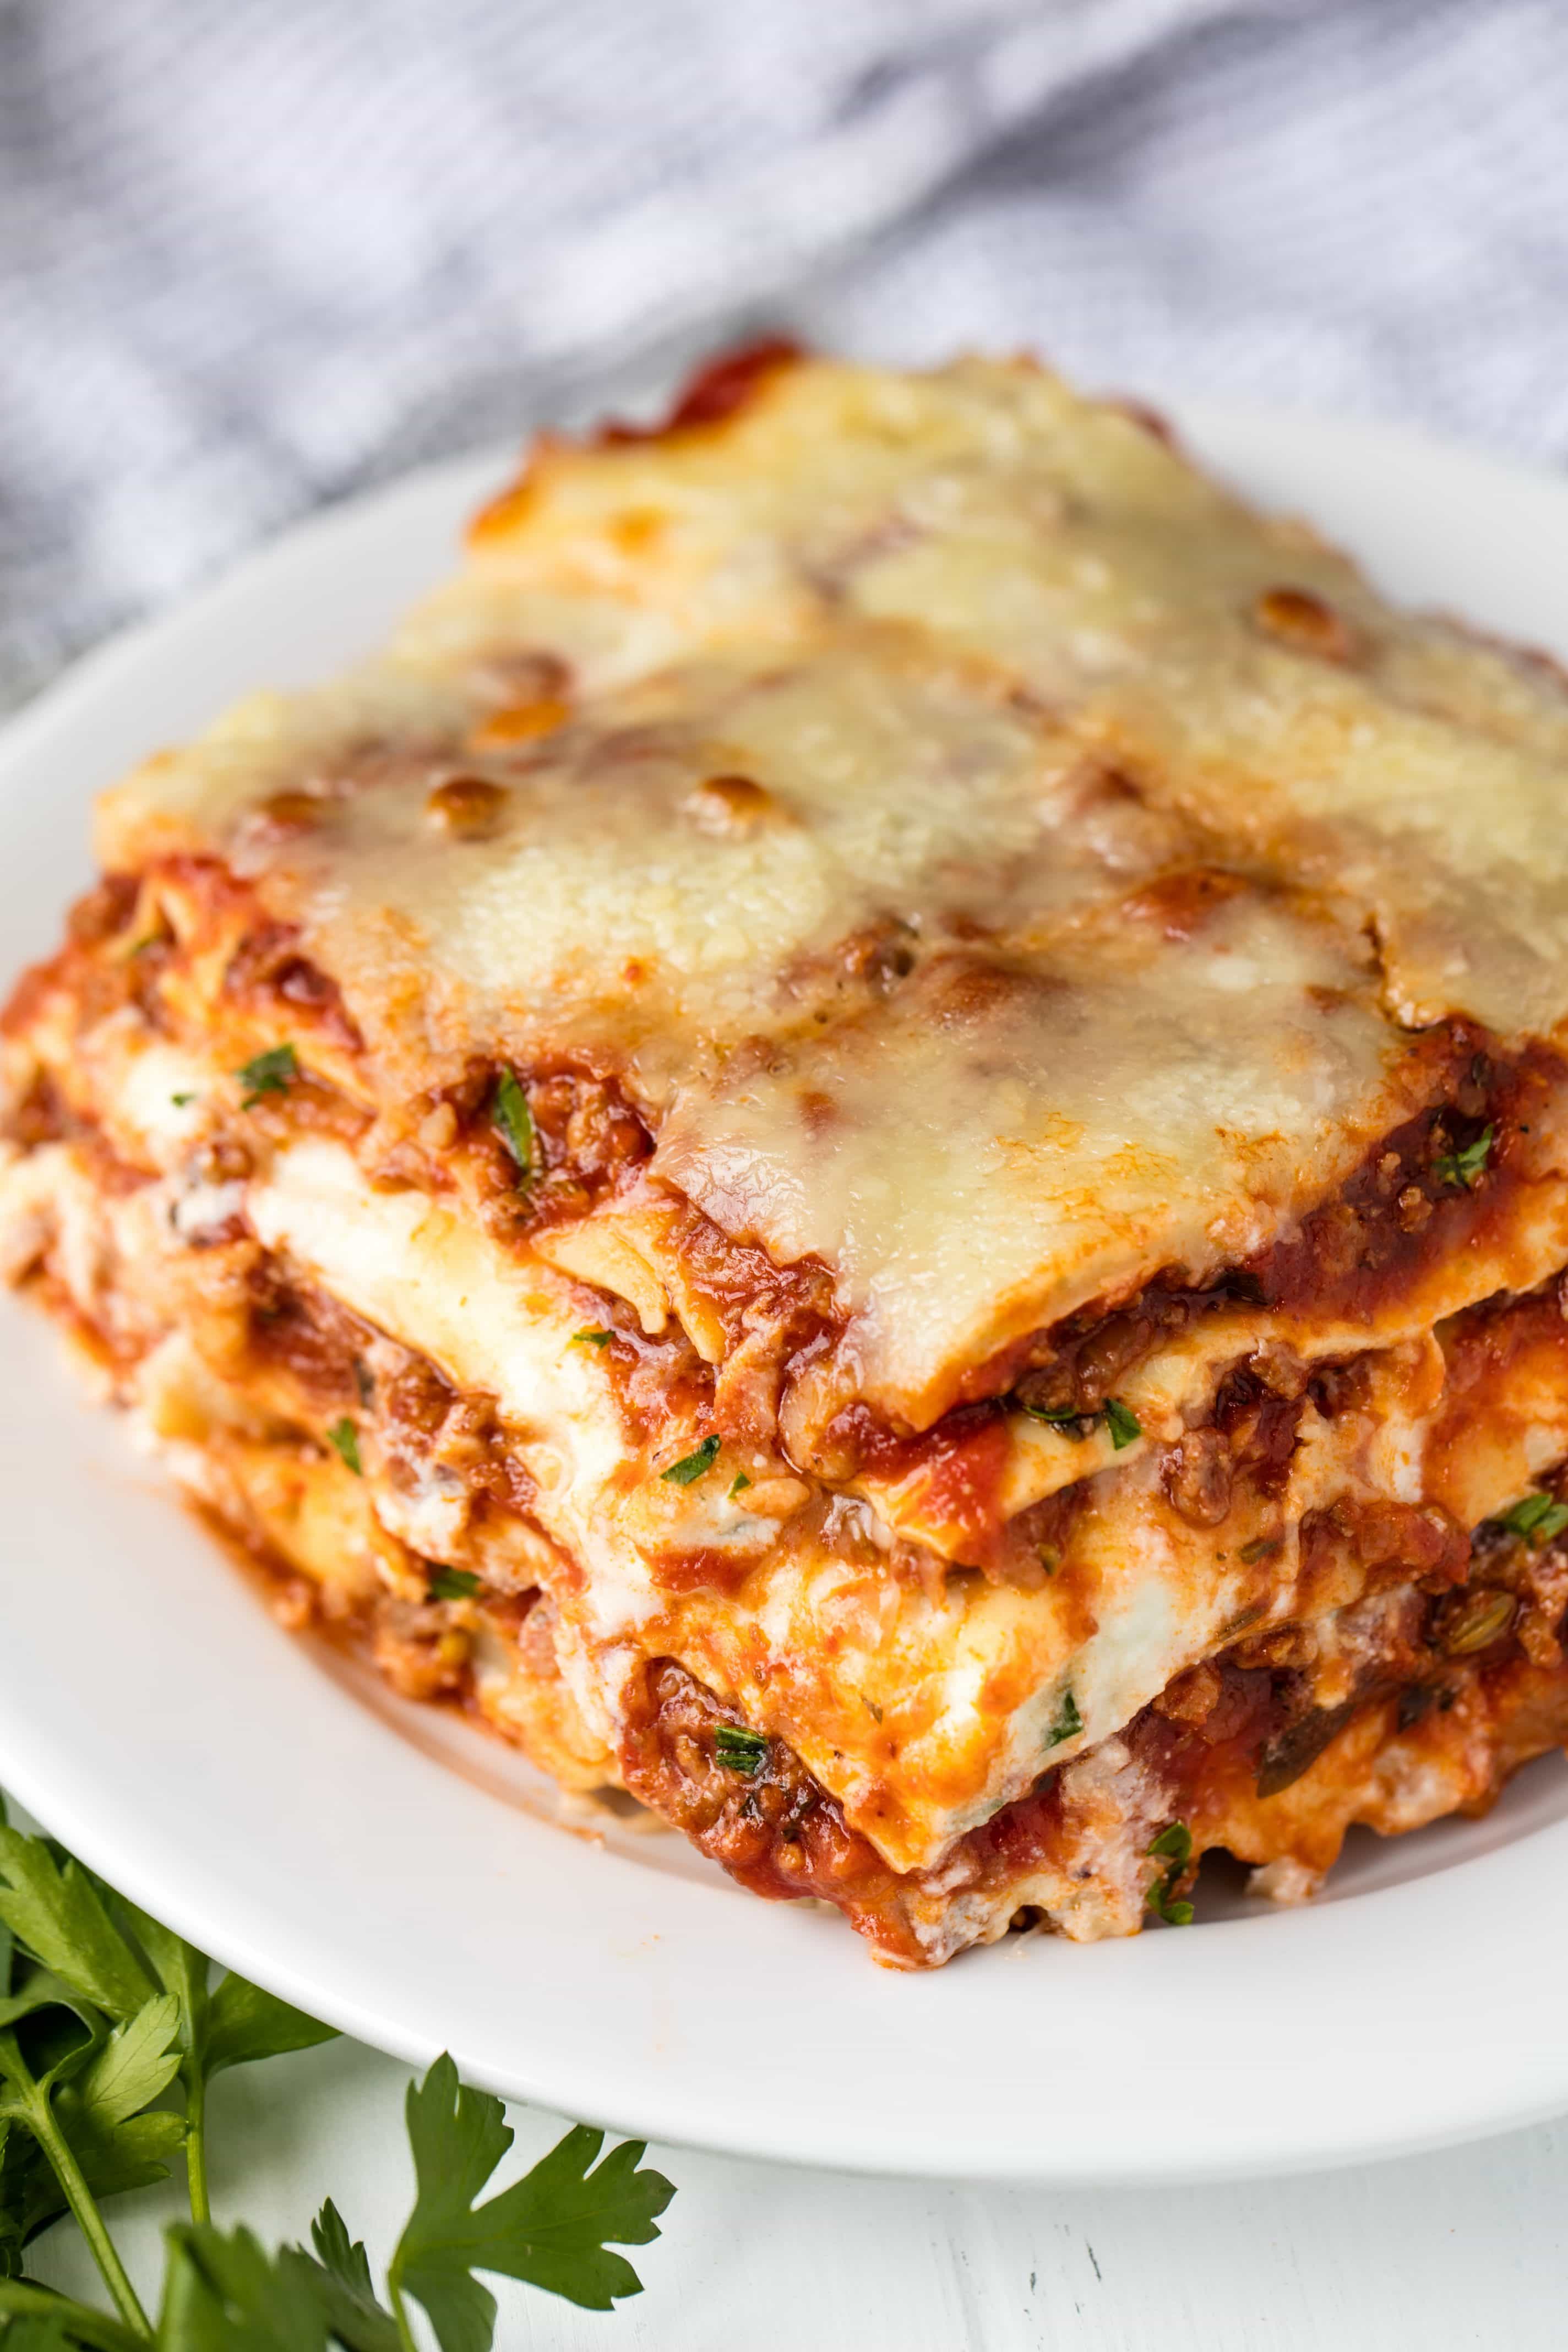 The Most Amazing Lasagna Recipe is the absolute perfect recipe for homemade Italian-style lasagna. The balance between layers of cheese, noodles, and homemade bolognese sauce is perfection!